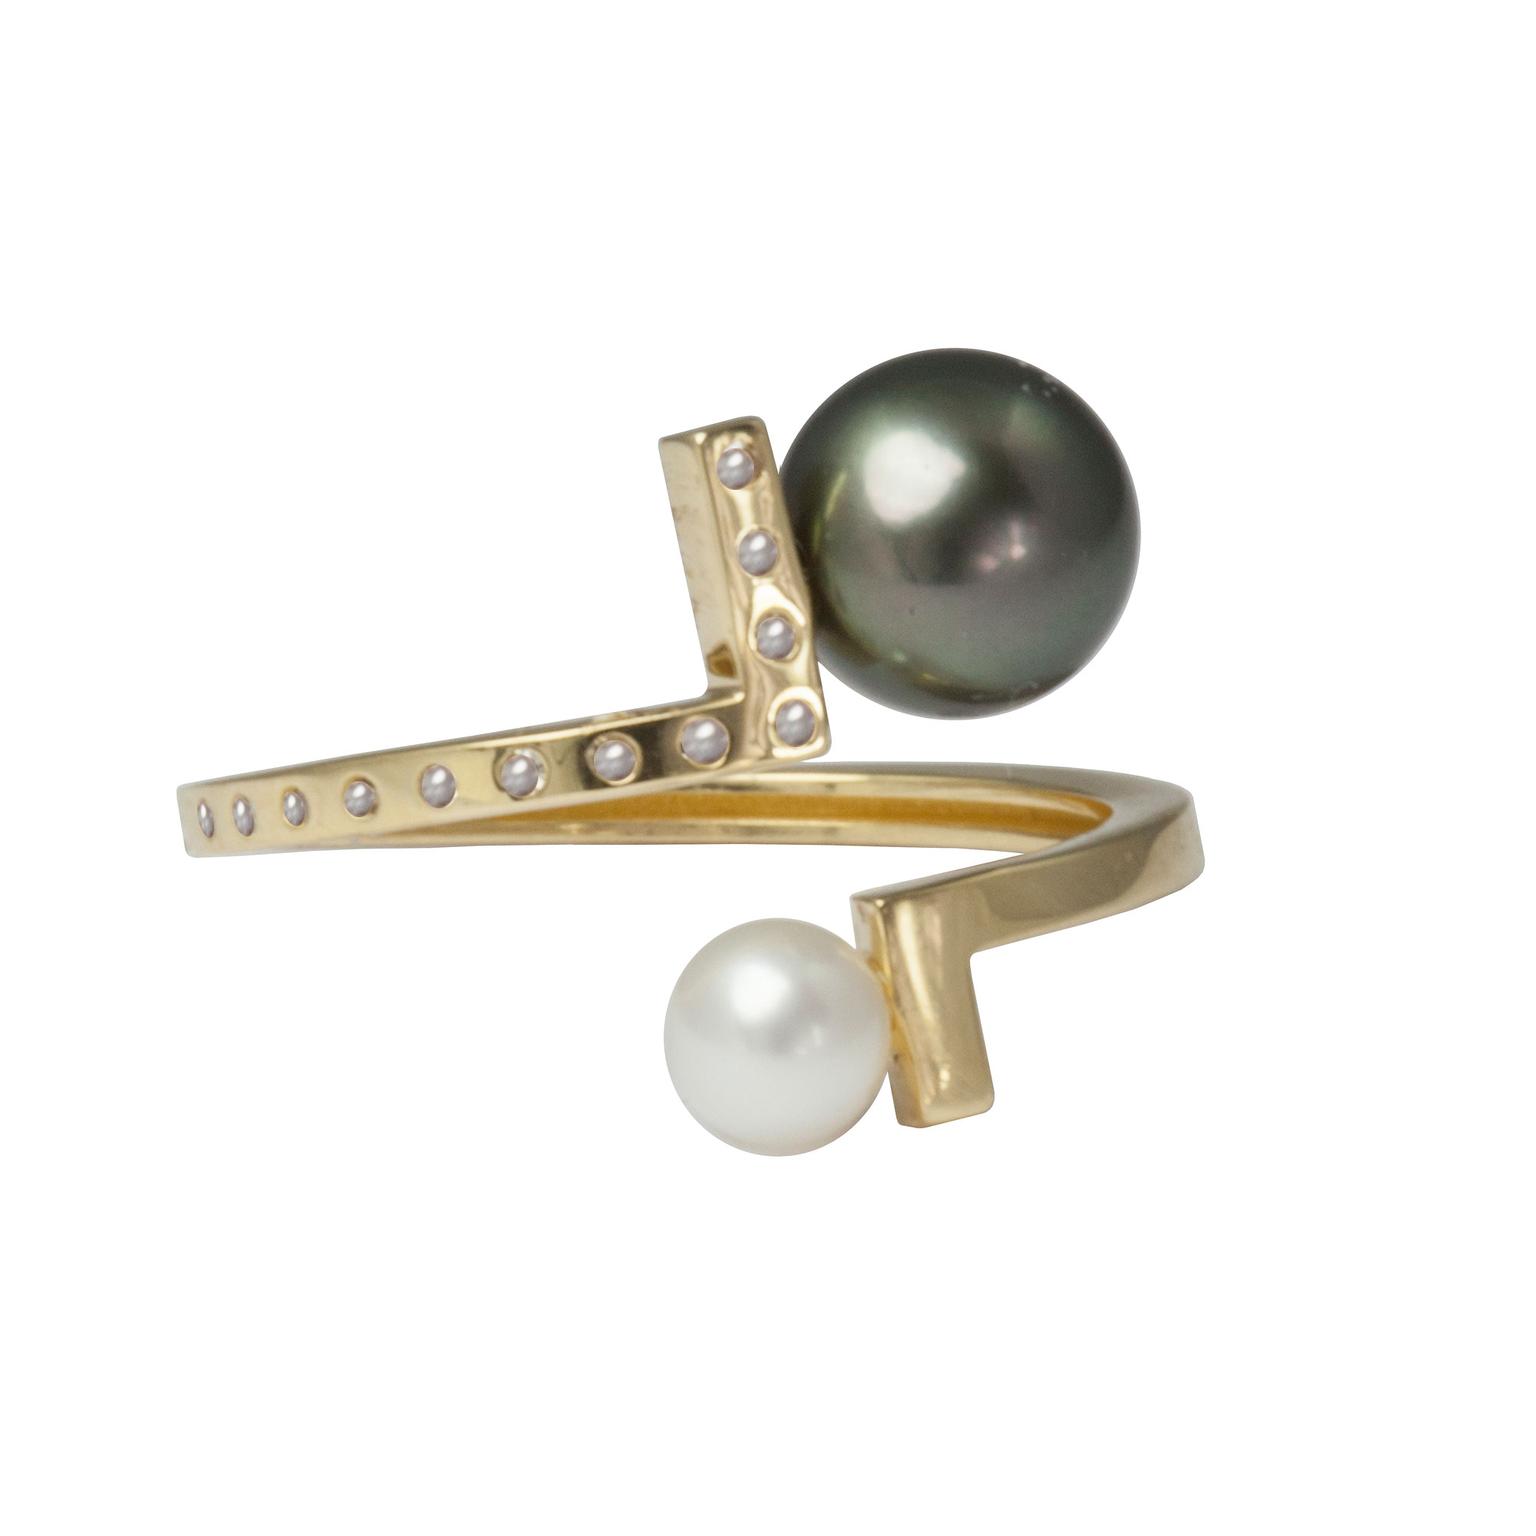 Kattri ring with diamond studded 18ct yellow gold band with a black Tahitian pearl and a white Akoya pearl